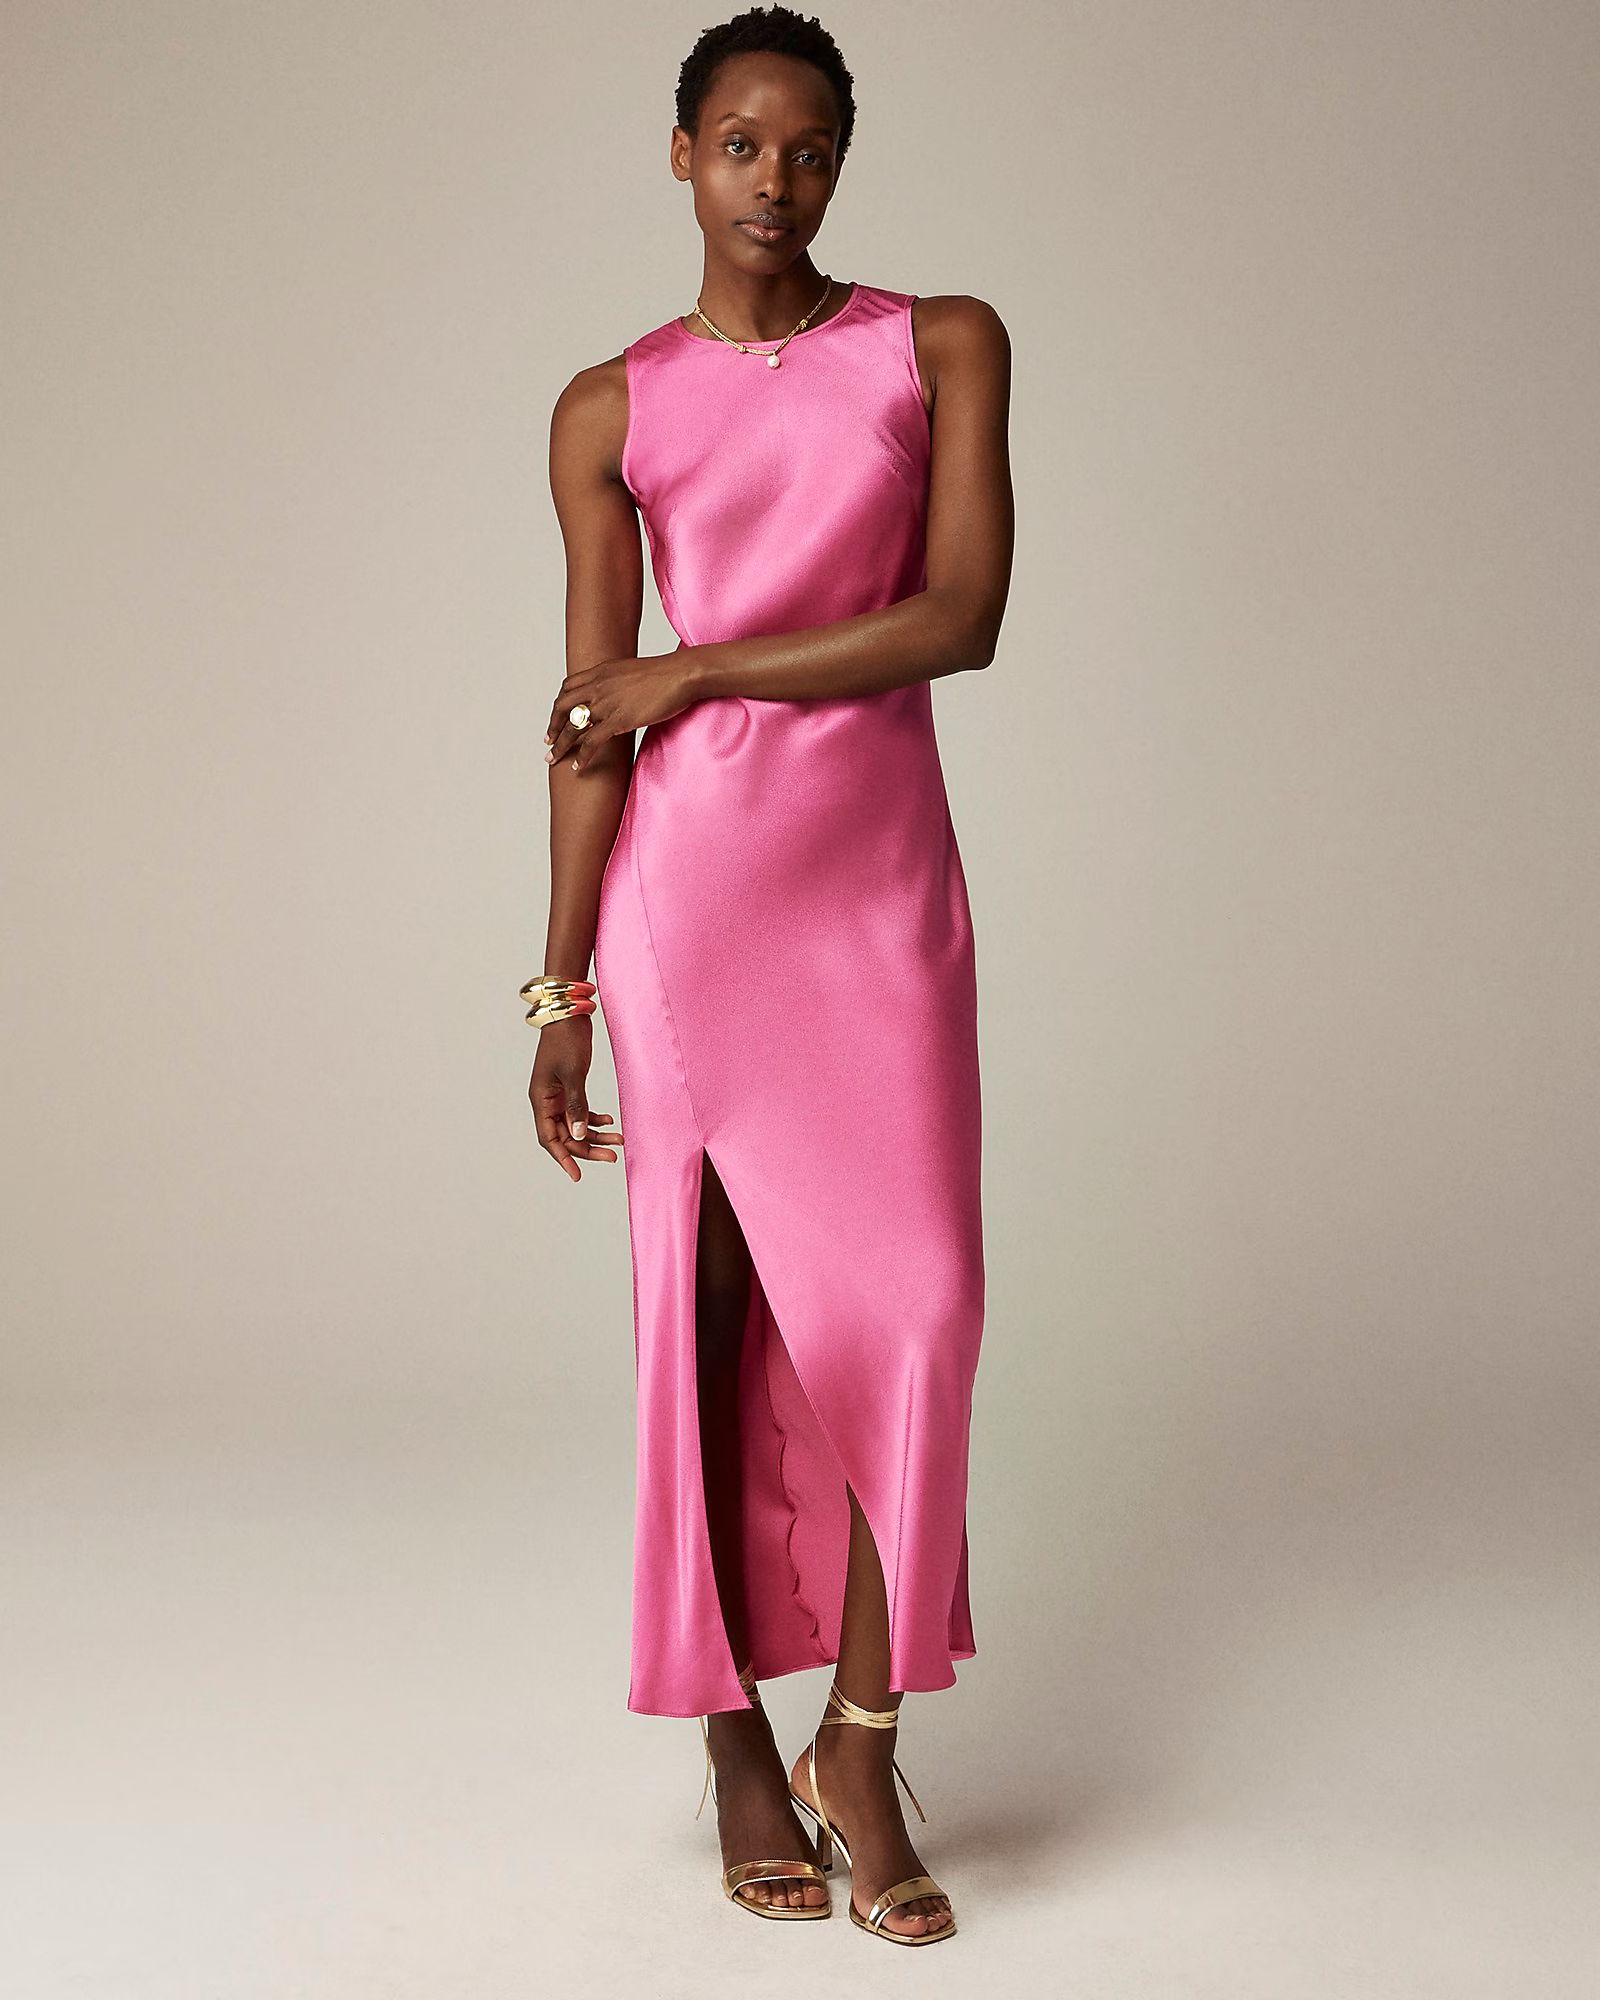 newHigh-neck slip dress in luster crepe$168.0030% off full price with code SHOP30Zinnia BloomSele... | J.Crew US